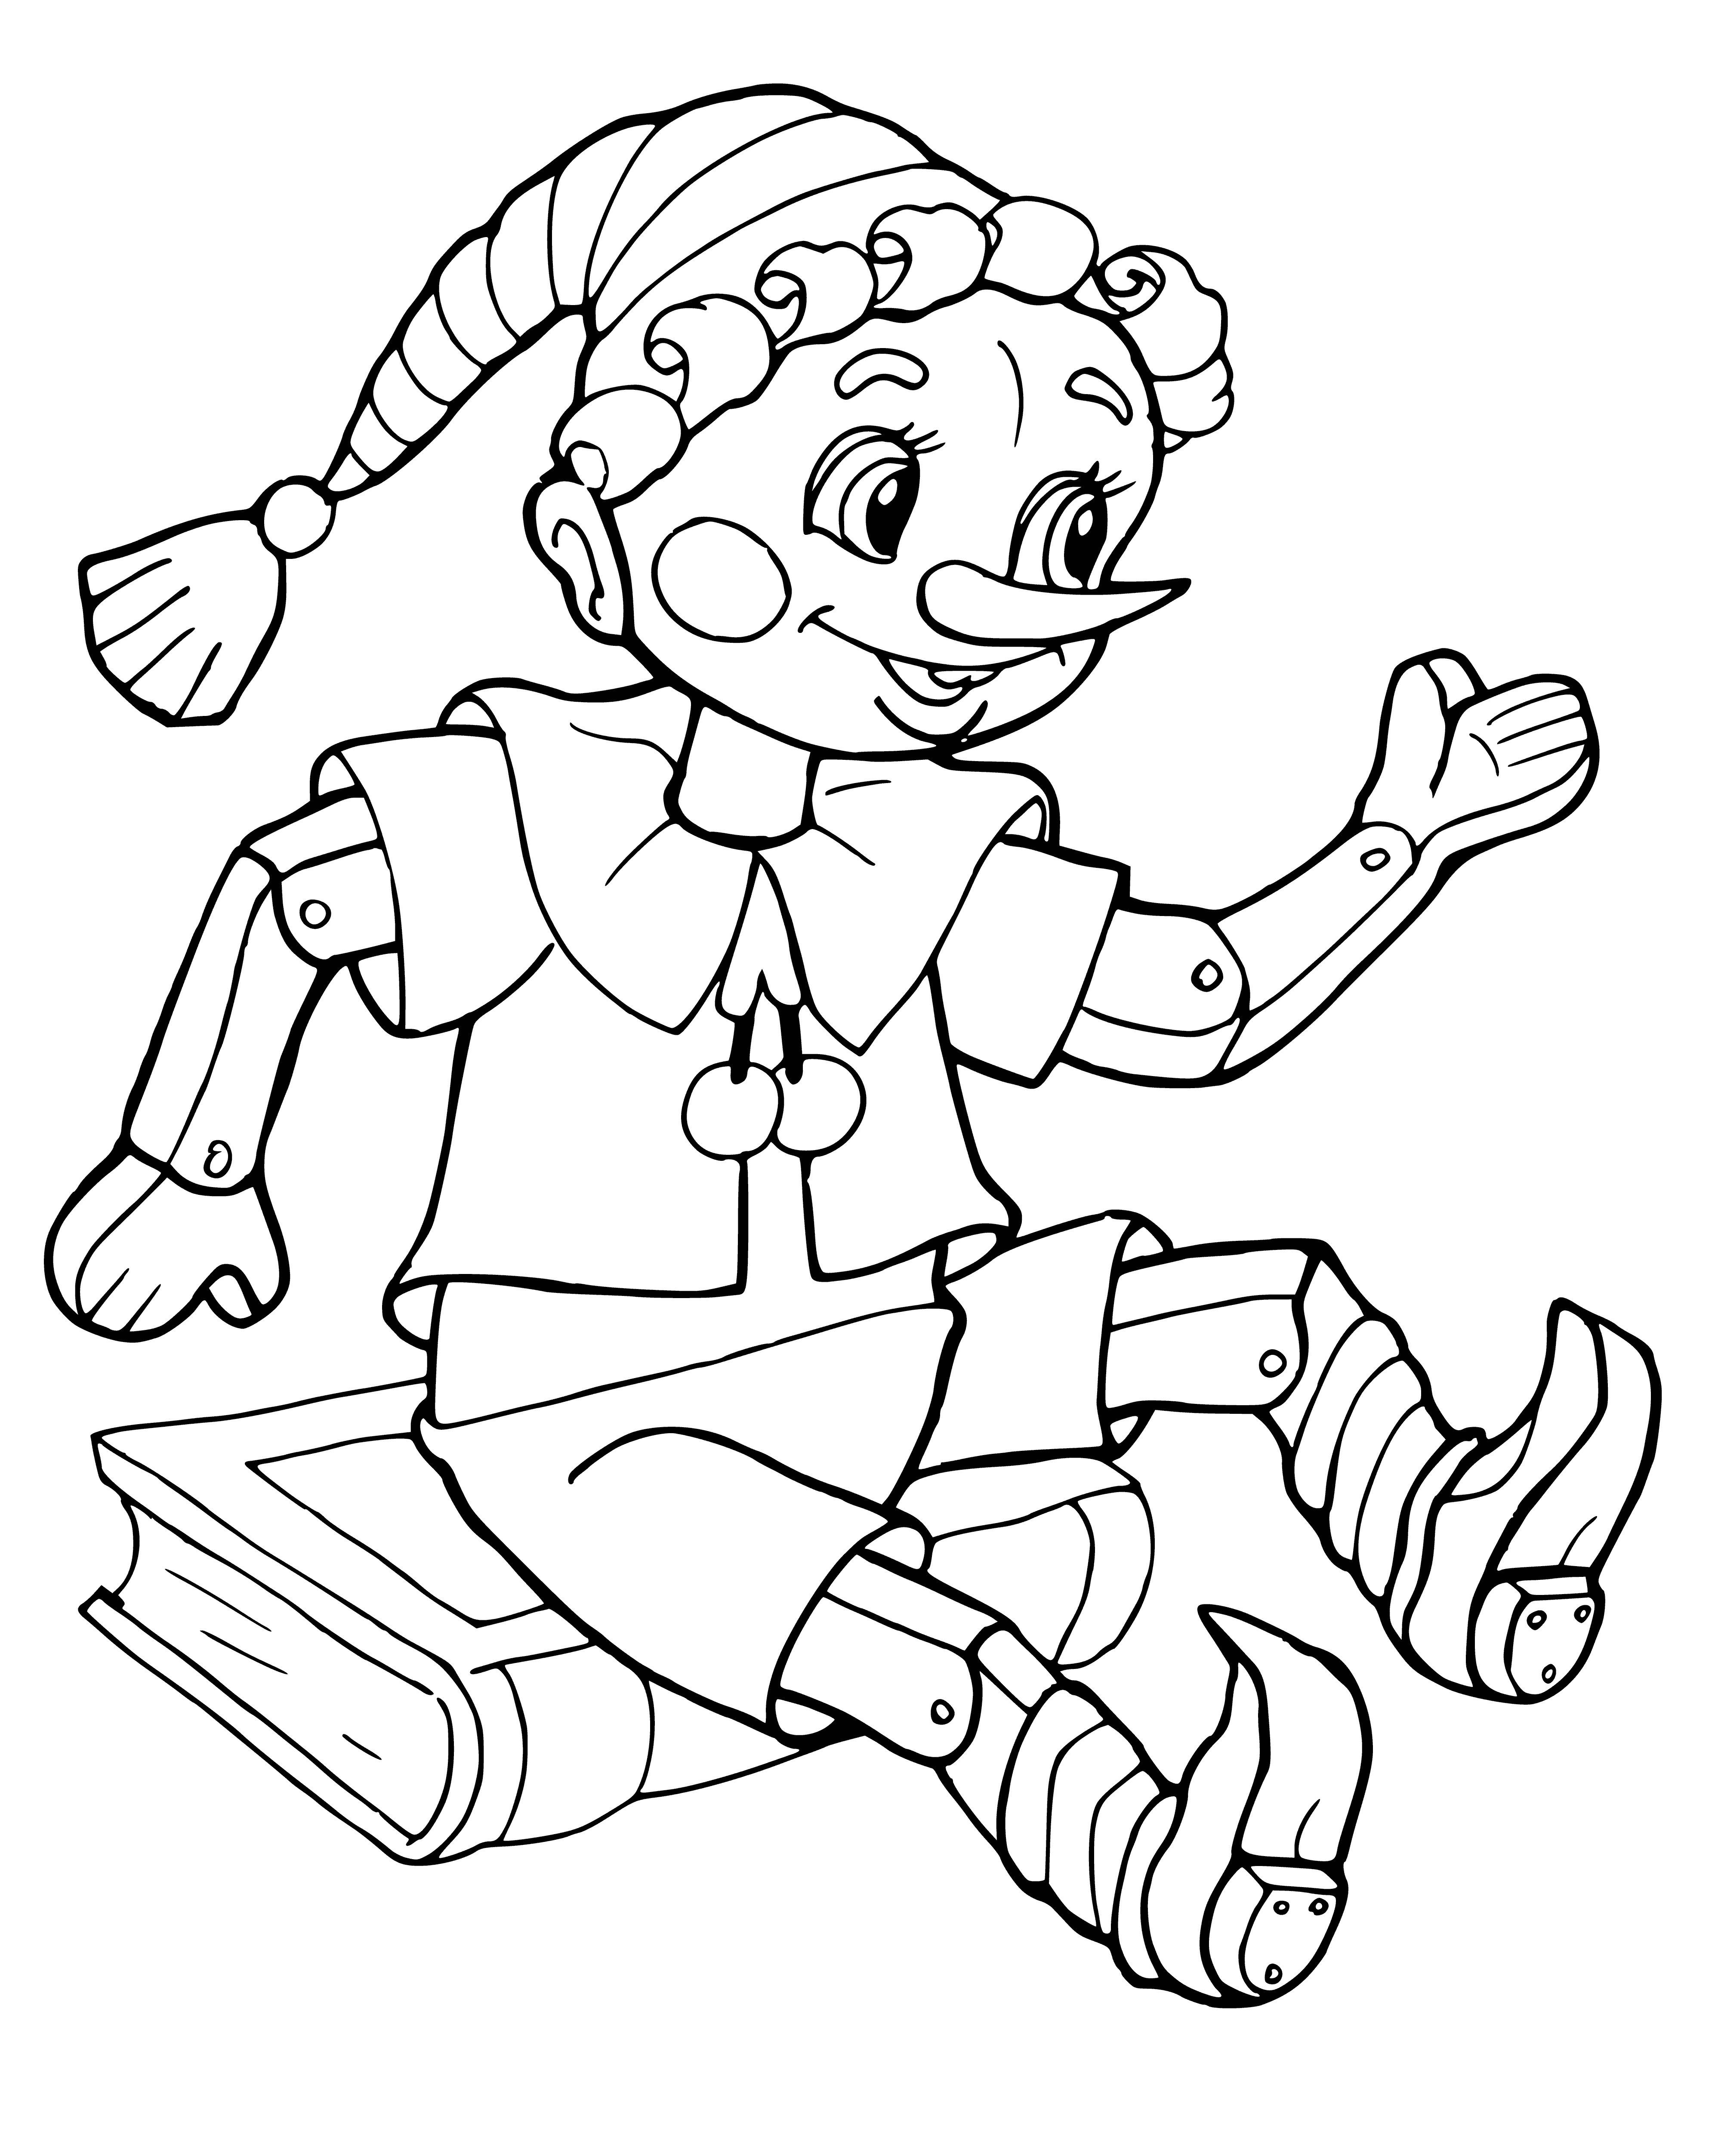 coloring page: Boy in pointy hat and long nose sits on stool, frowning and holding a long stick. #characterdesign